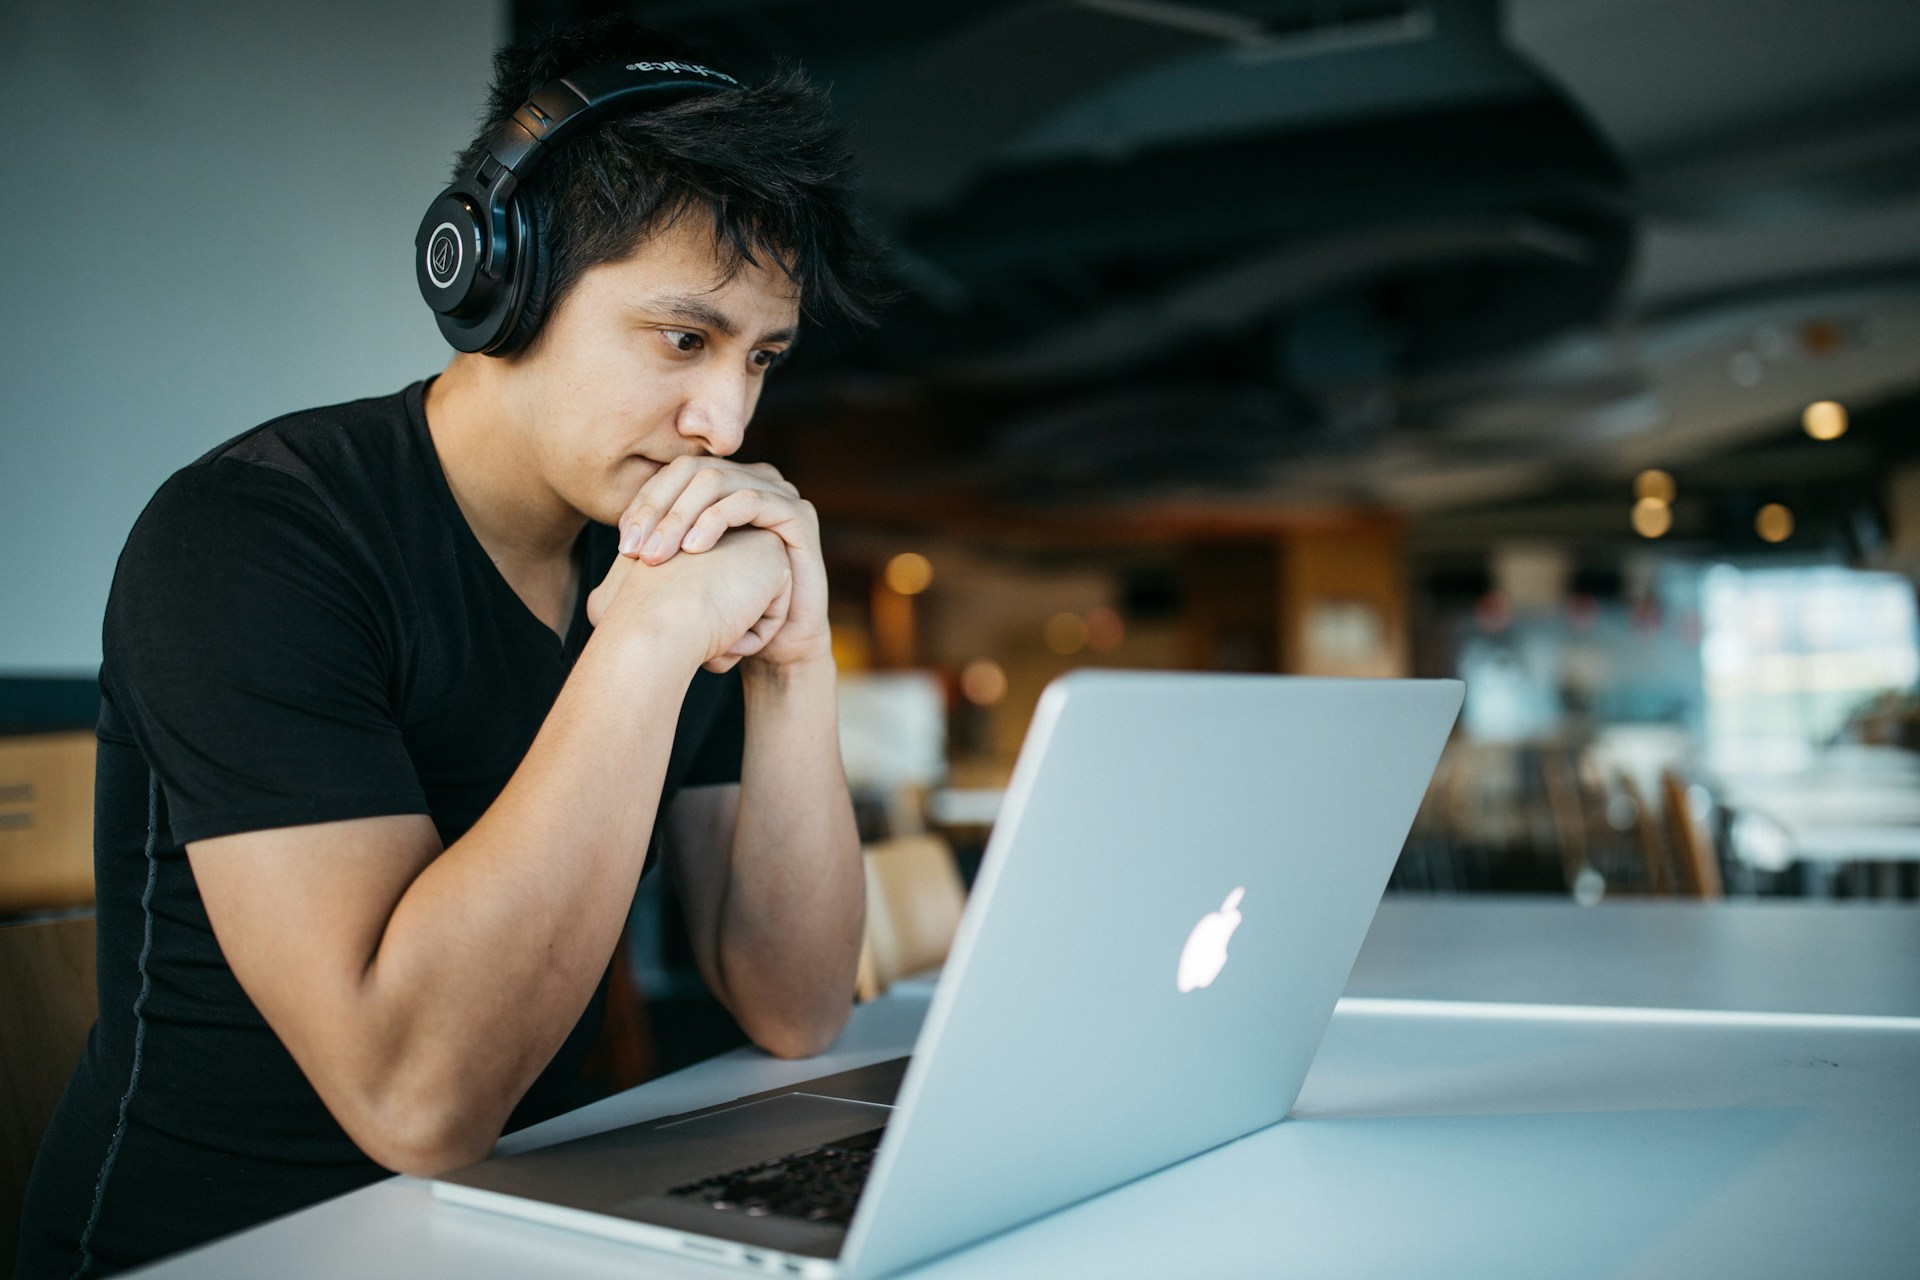 A guy working on his laptop while wearing headphones. Photo by Wes Hicks on Unsplash